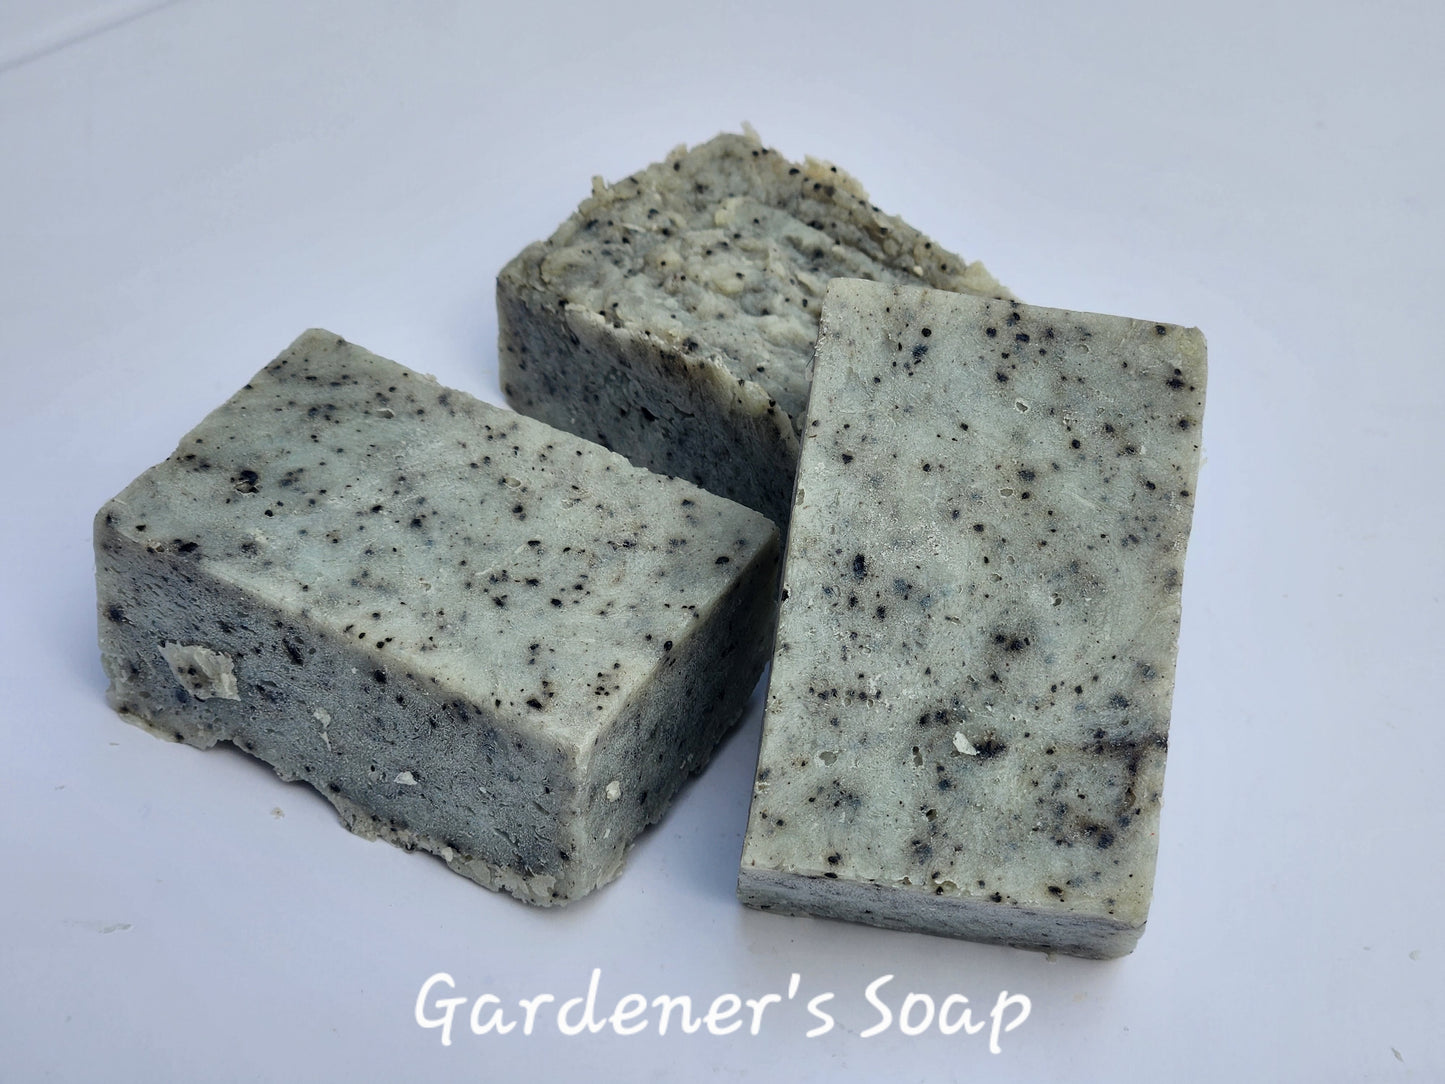 Natural "Gardener's Soap" made with Organic Coconut Oil and Ground Coffee